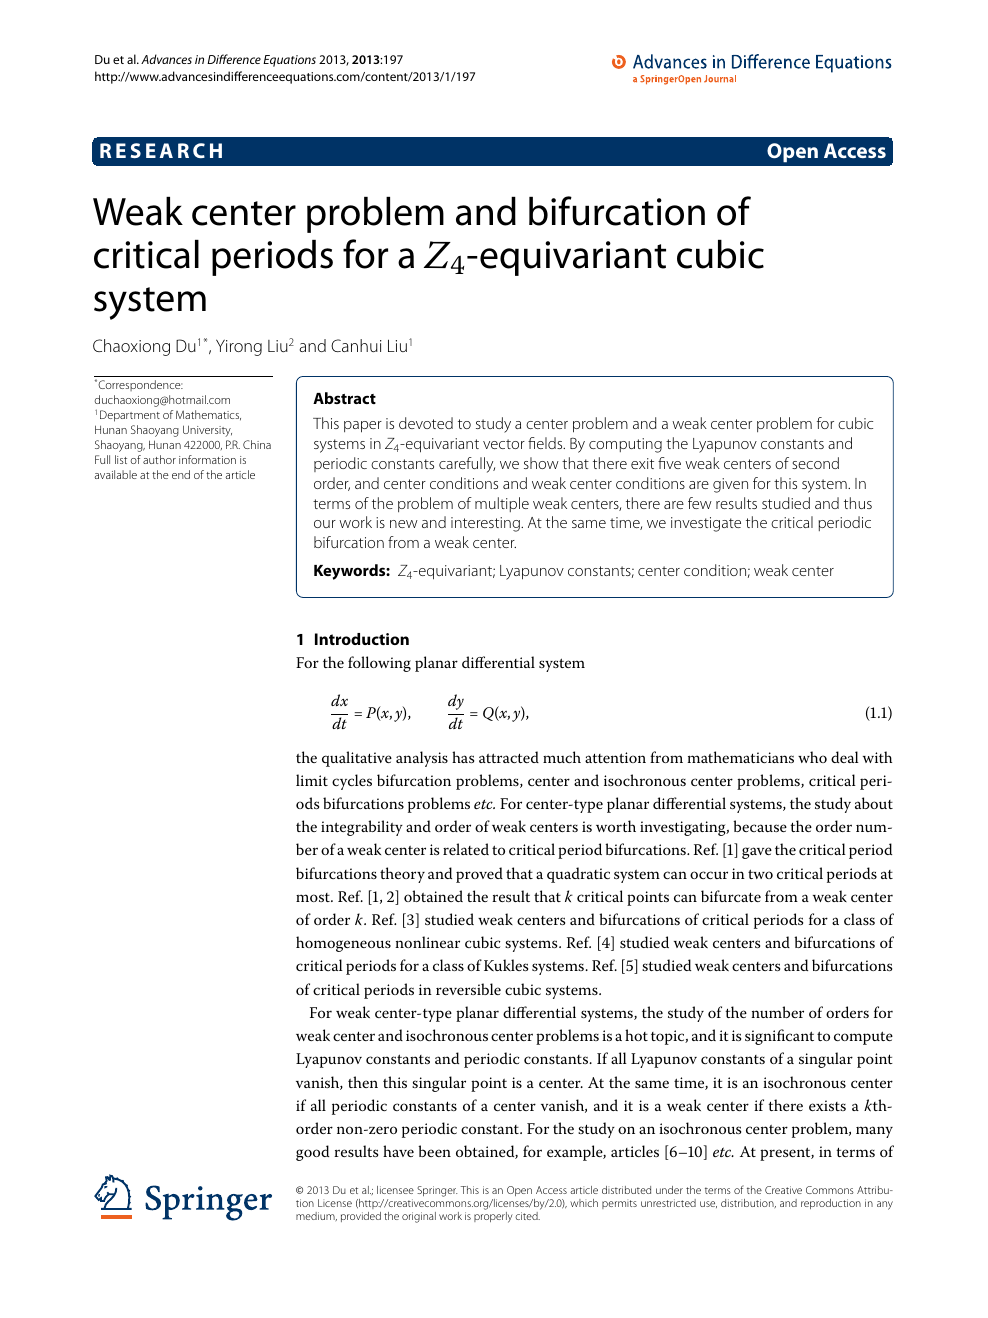 Weak Center Problem And Bifurcation Of Critical Periods For A Z4 Equivariant Cubic System Topic Of Research Paper In Mathematics Download Scholarly Article Pdf And Read For Free On Cyberleninka Open Science